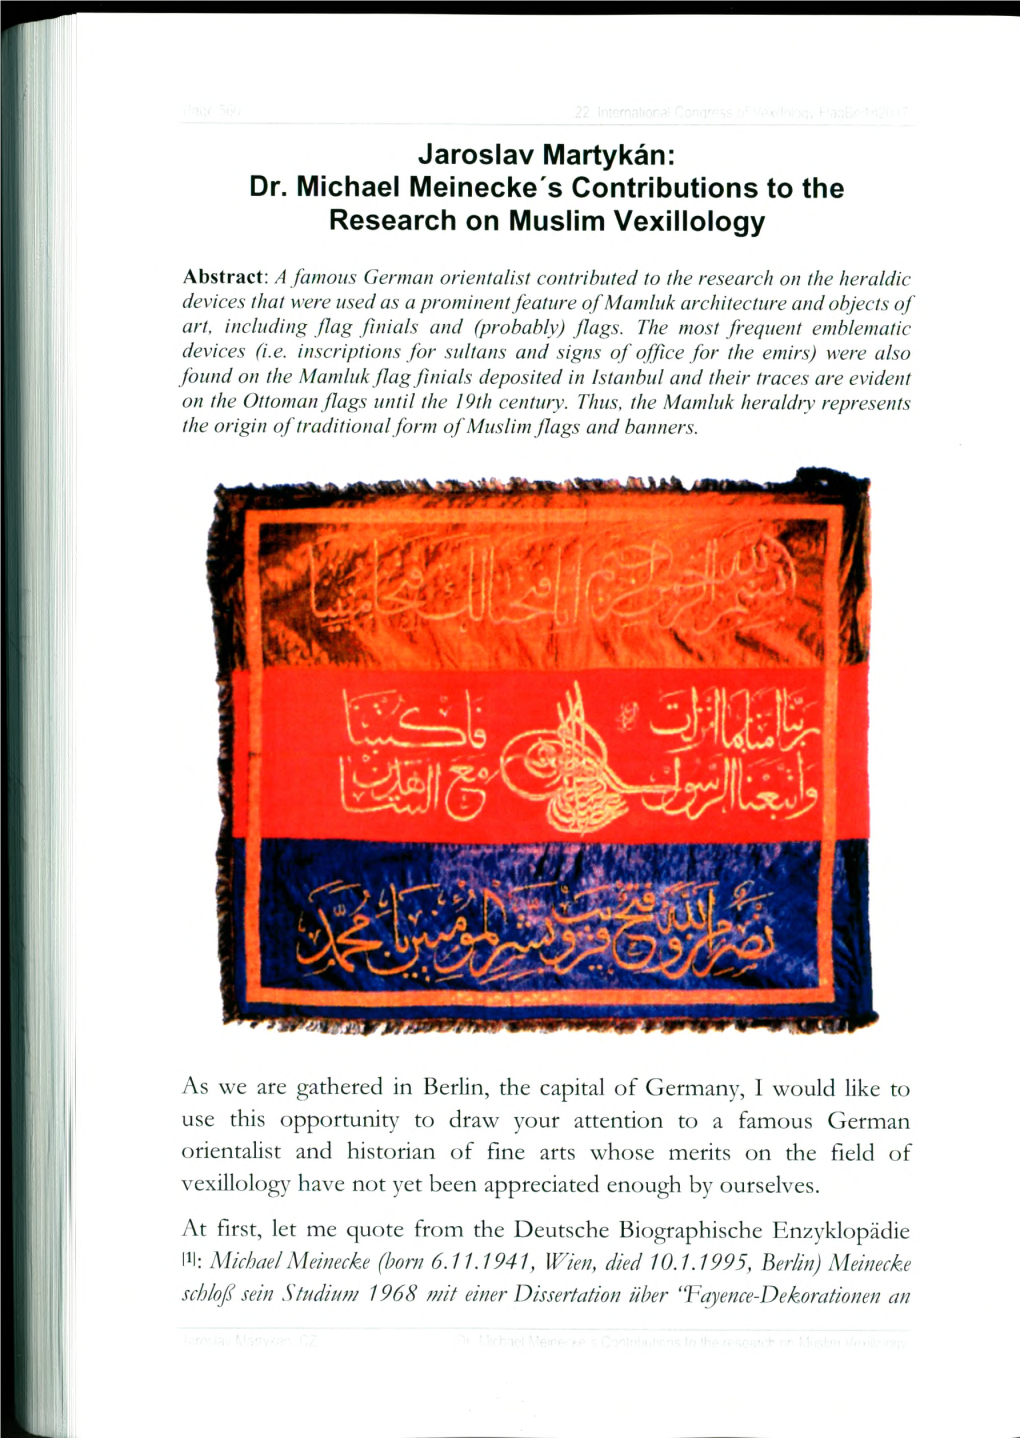 Dr. Michael Meinecke's Contributions to the Research on Muslim Vexillology